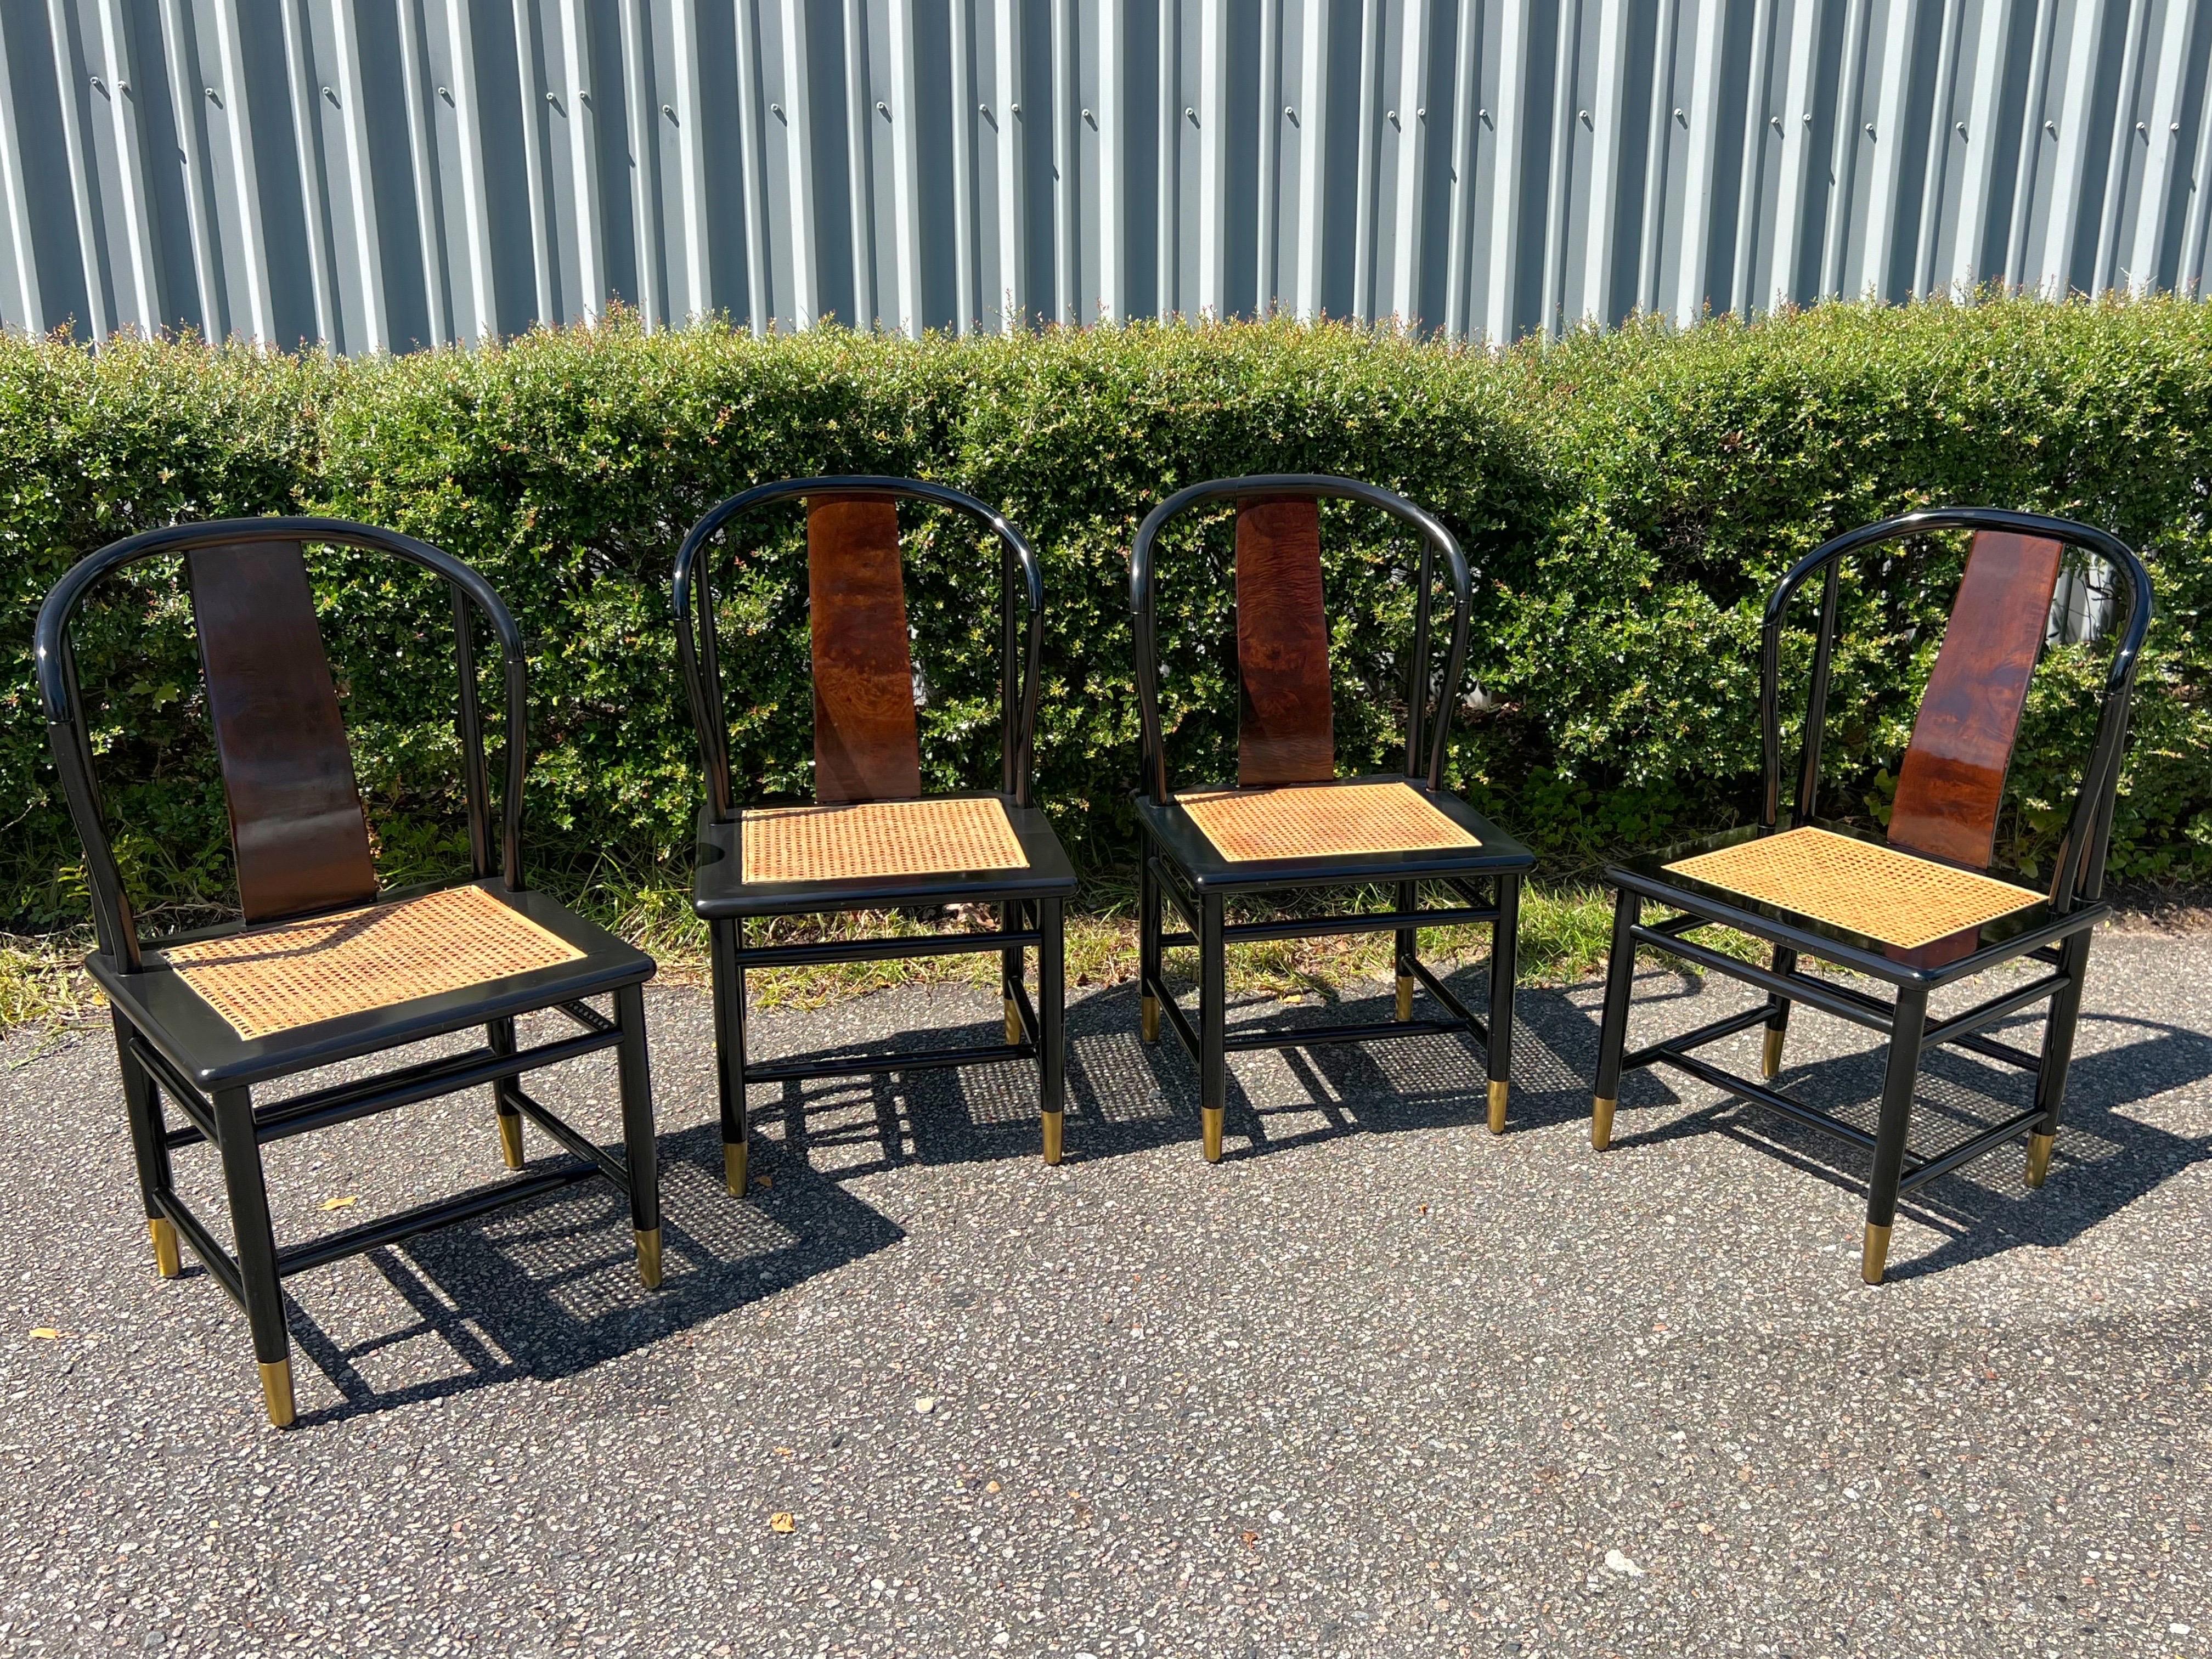 The chairs (four in total) feature a black lacquered, wooden frame with burl back splats, caned seats, and brass sabots. A luxurious set in very nice, vintage condition with only a few, light scuffs to the lacquer and light wear to the unpolished,